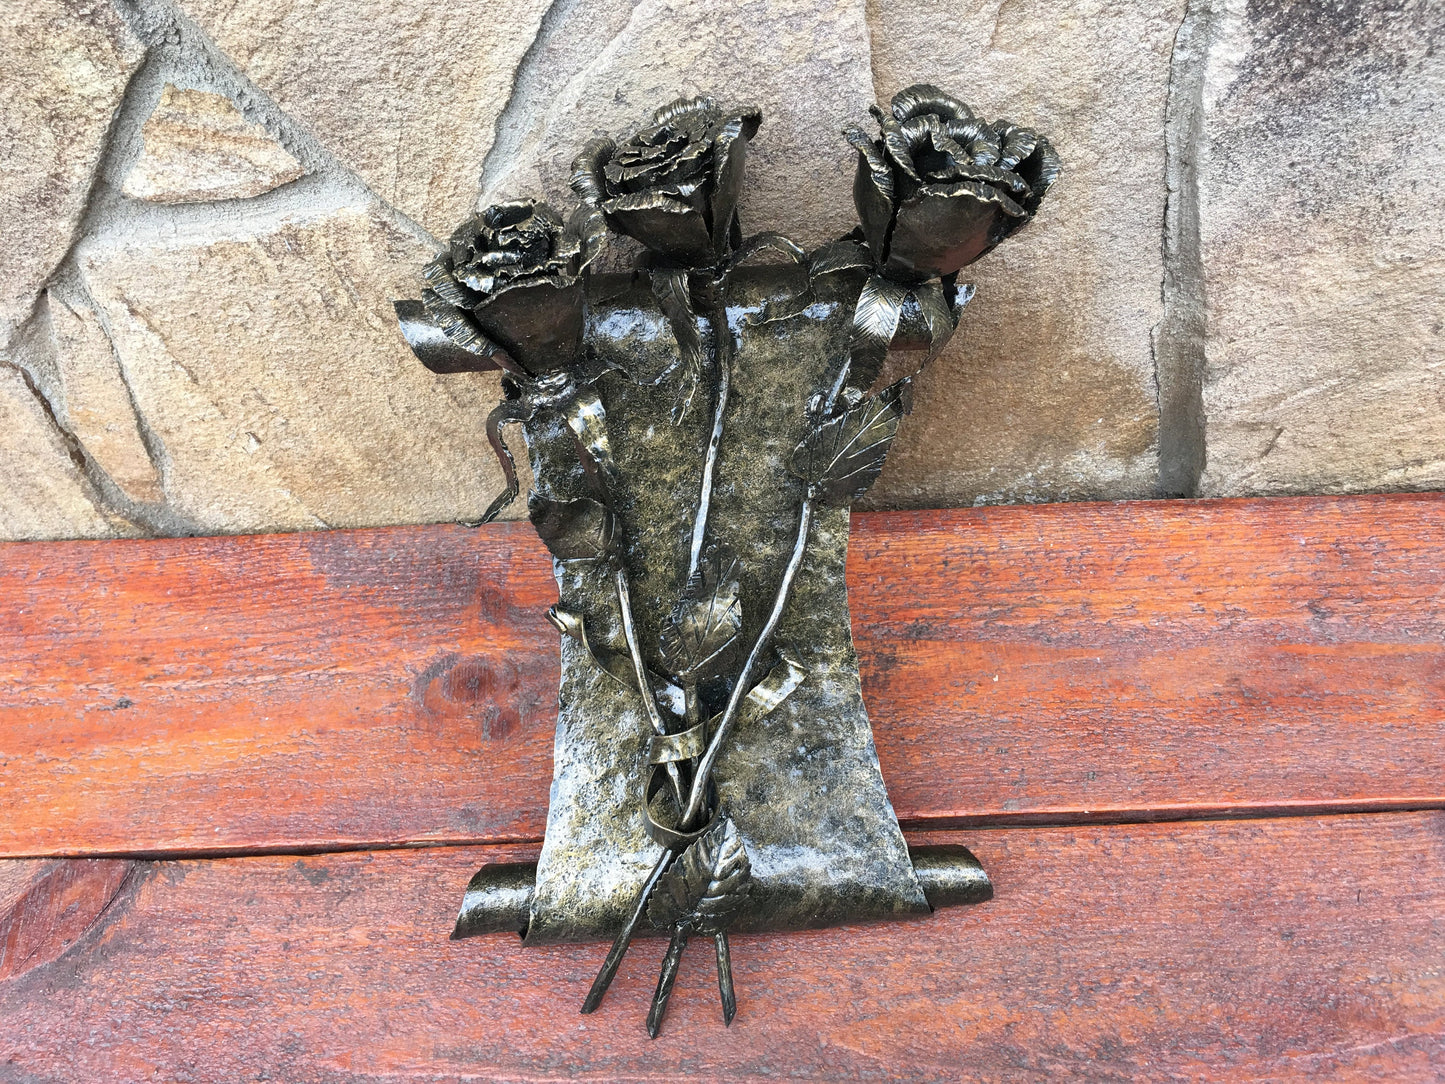 6th anniversary gift for her, iron anniversary gift for her, metal iron bouquet, iron rose, forged rose, iron gift, metal rose, iron gifts